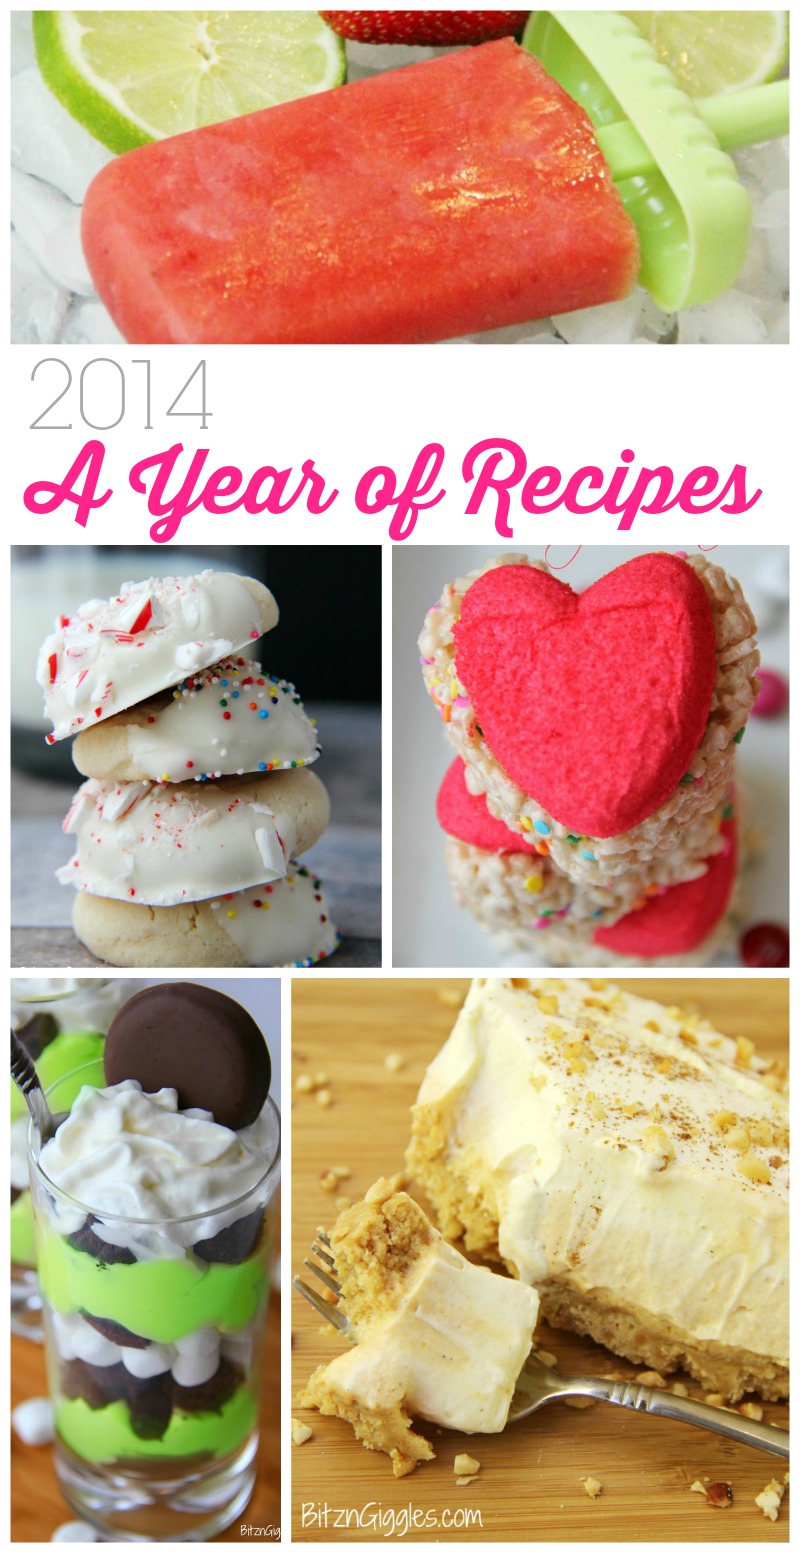 2014 - A Year of Recipes from Bitz & Giggles